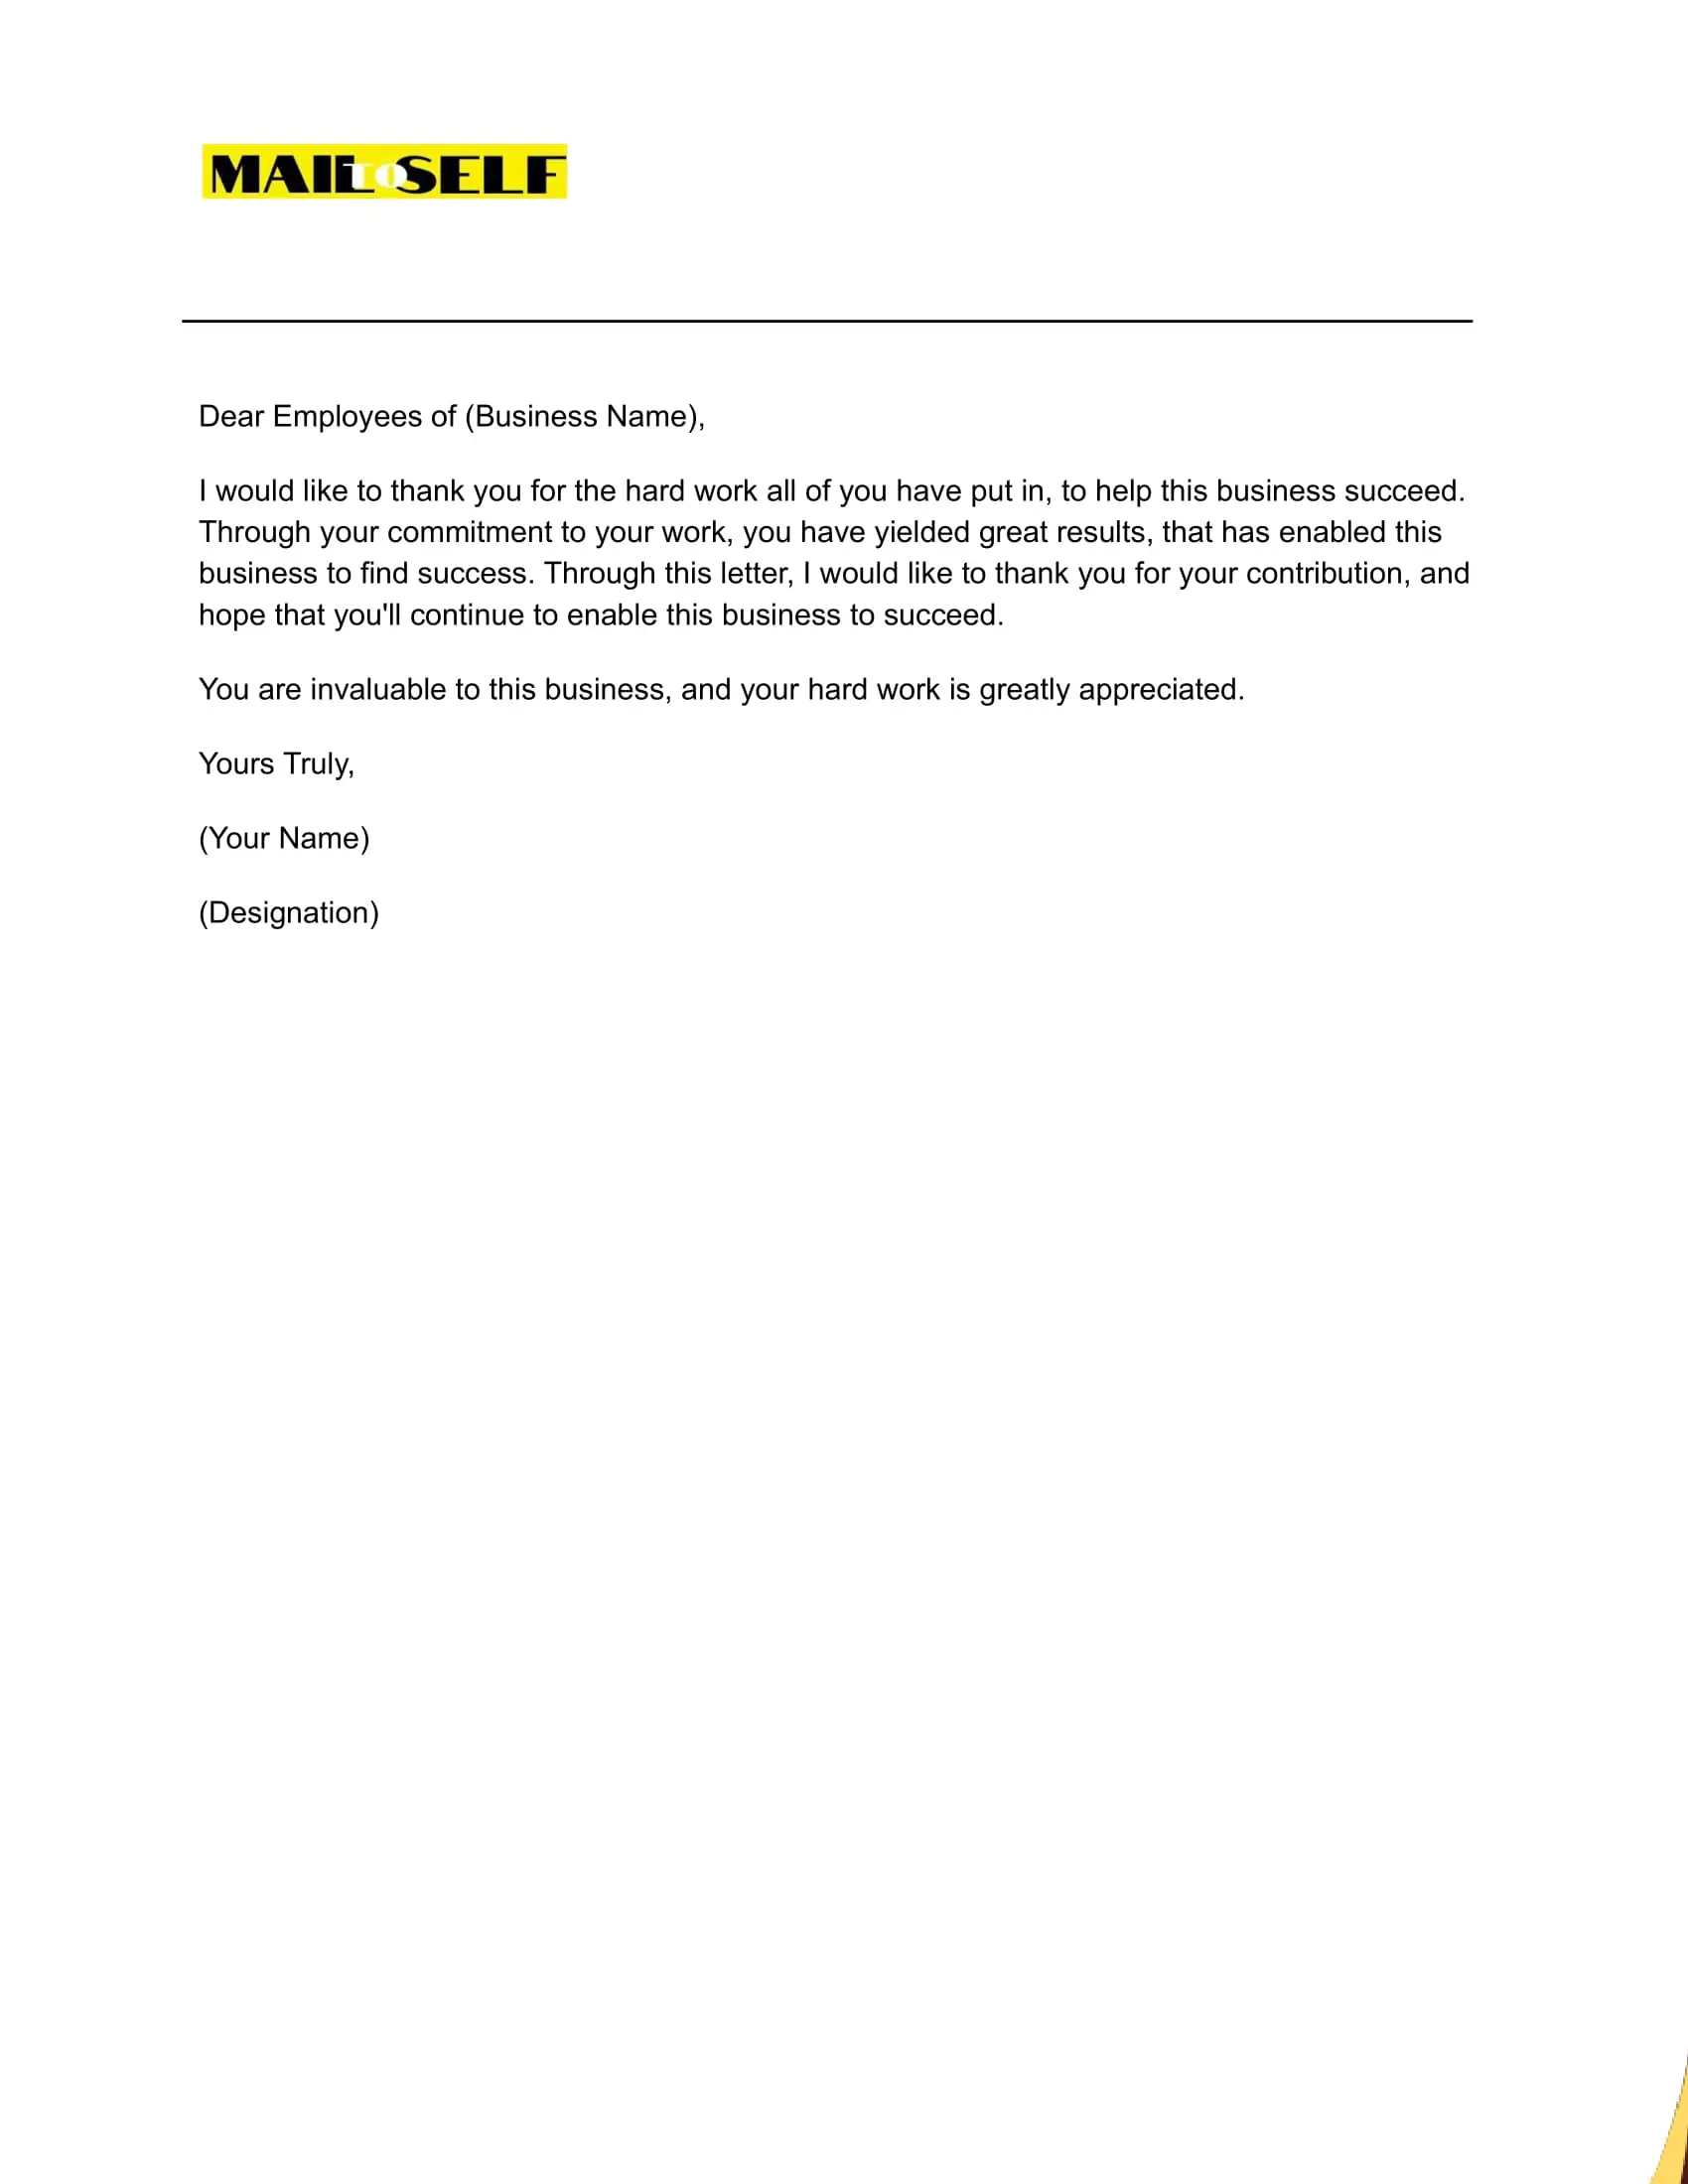 Sample #5 Thank You Letter to Employees for Excellent Performance 